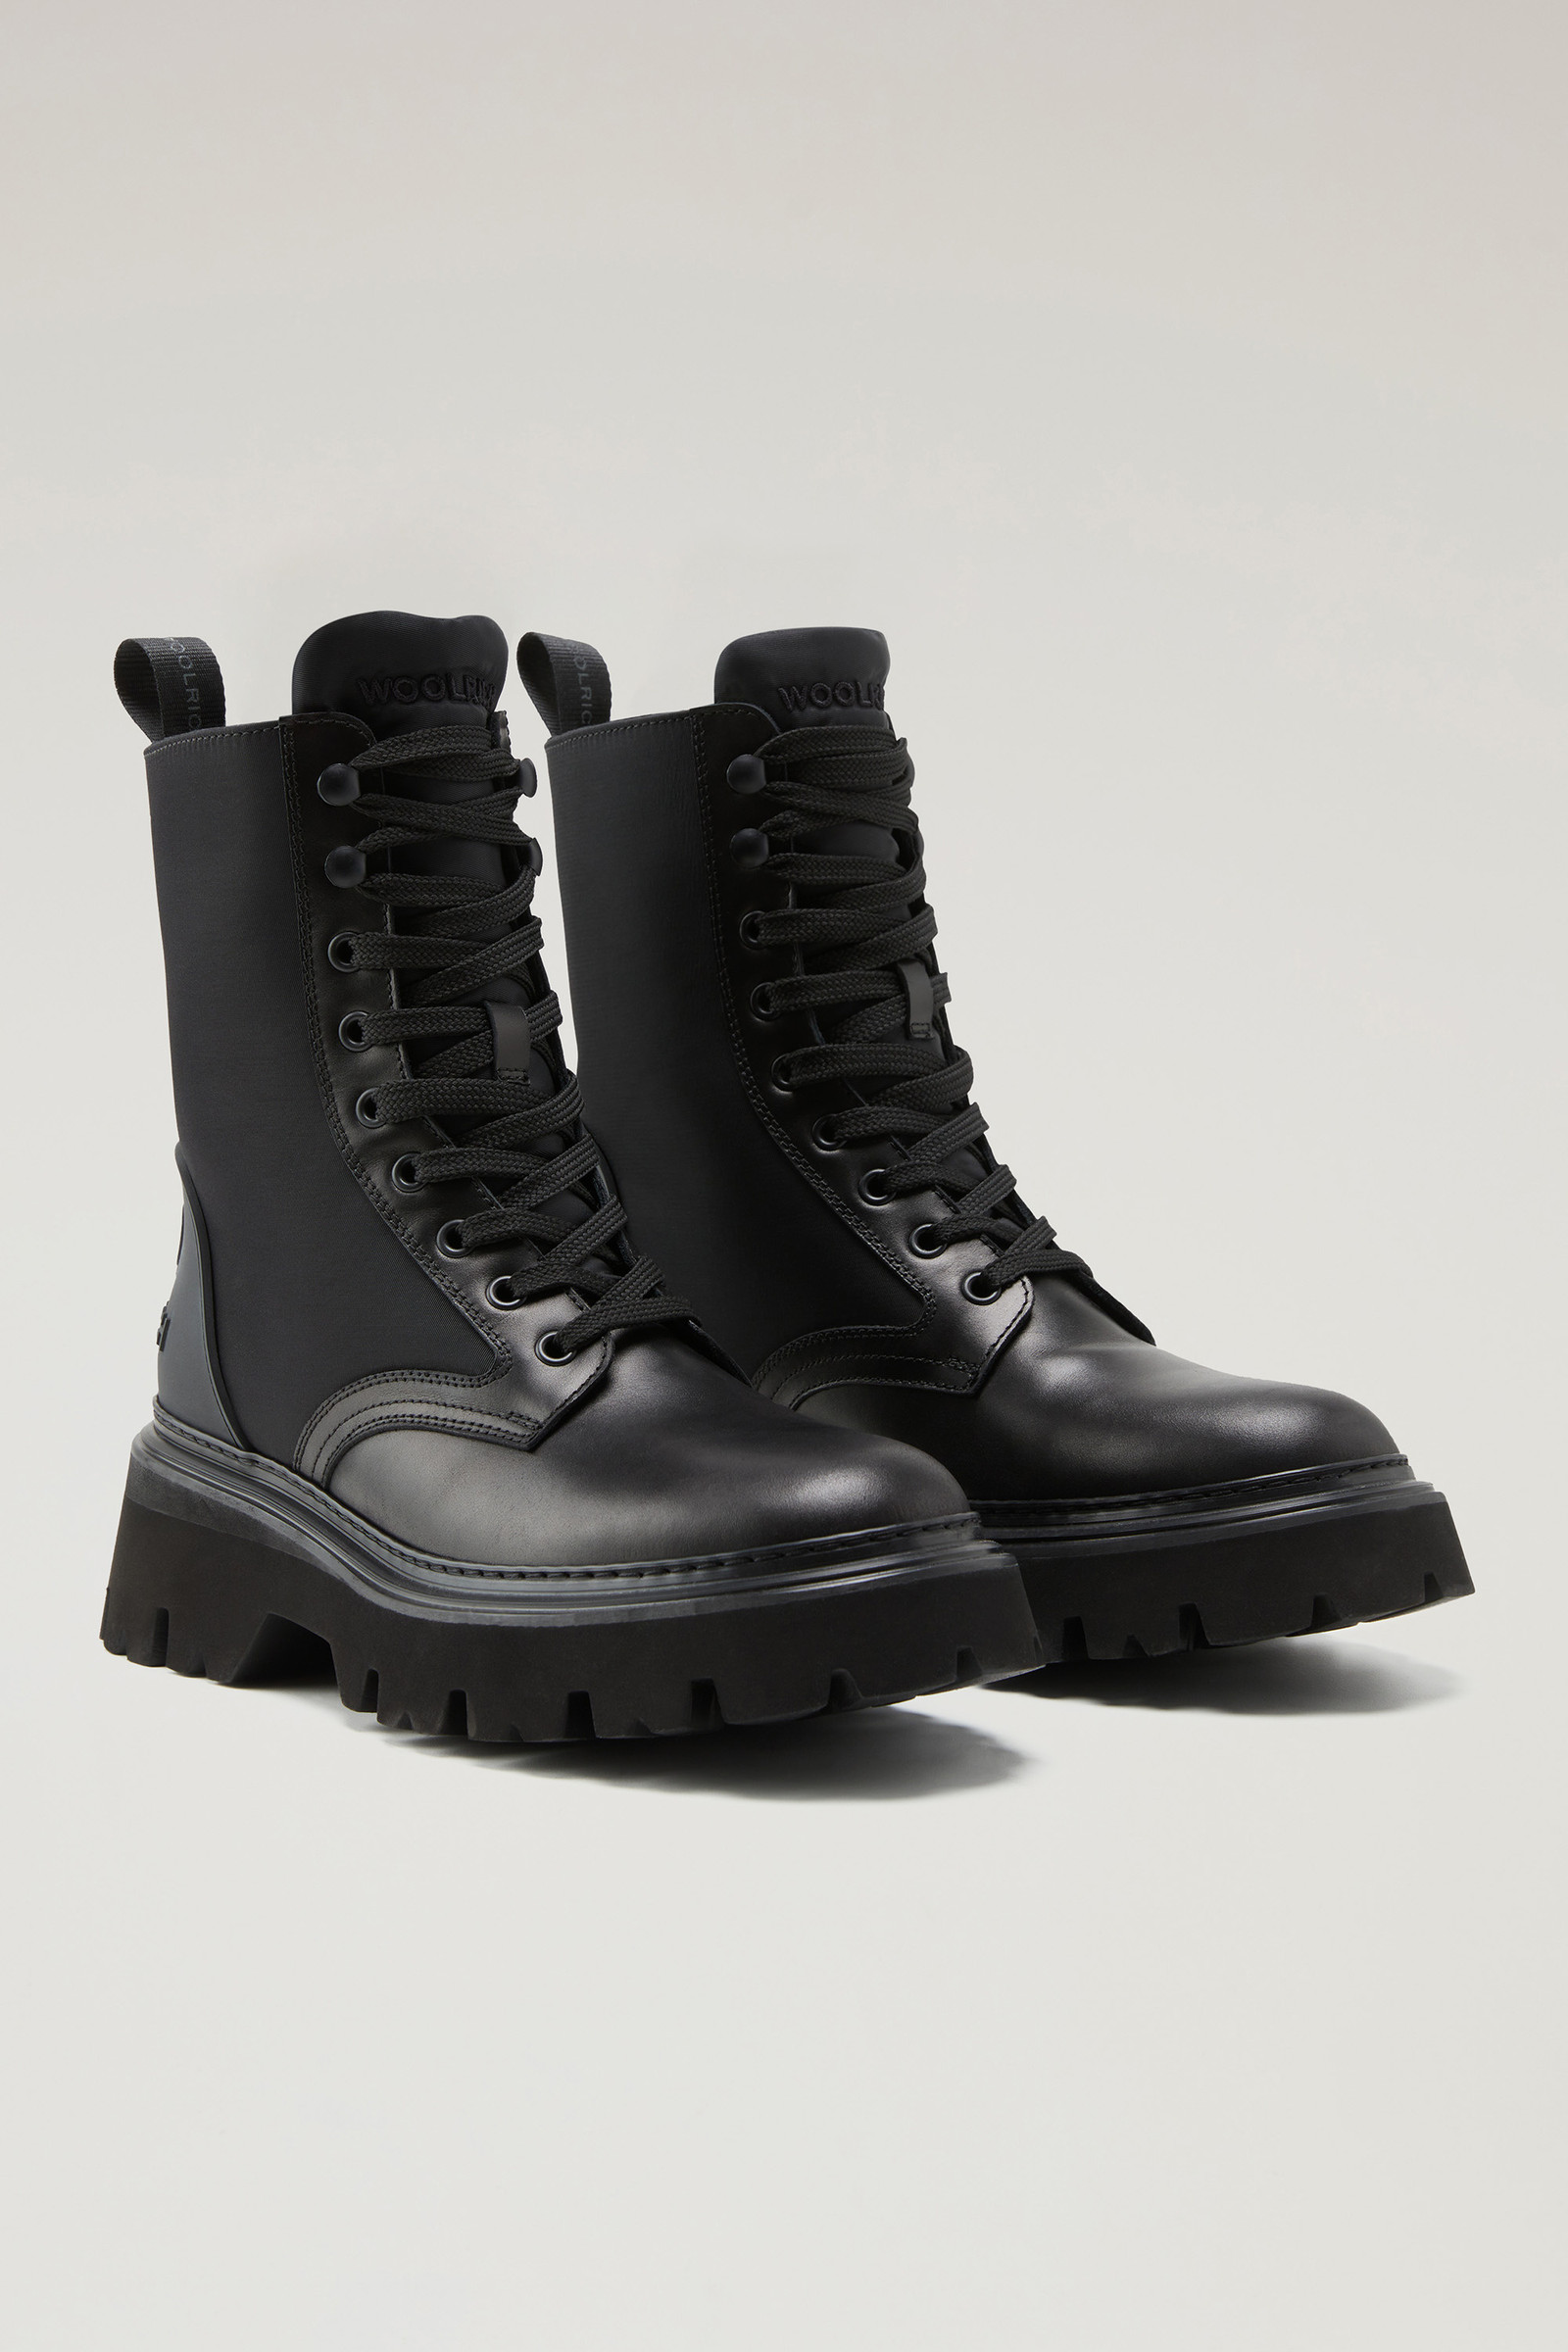 Women's Boots in Calfskin and Nylon Black | Woolrich USA